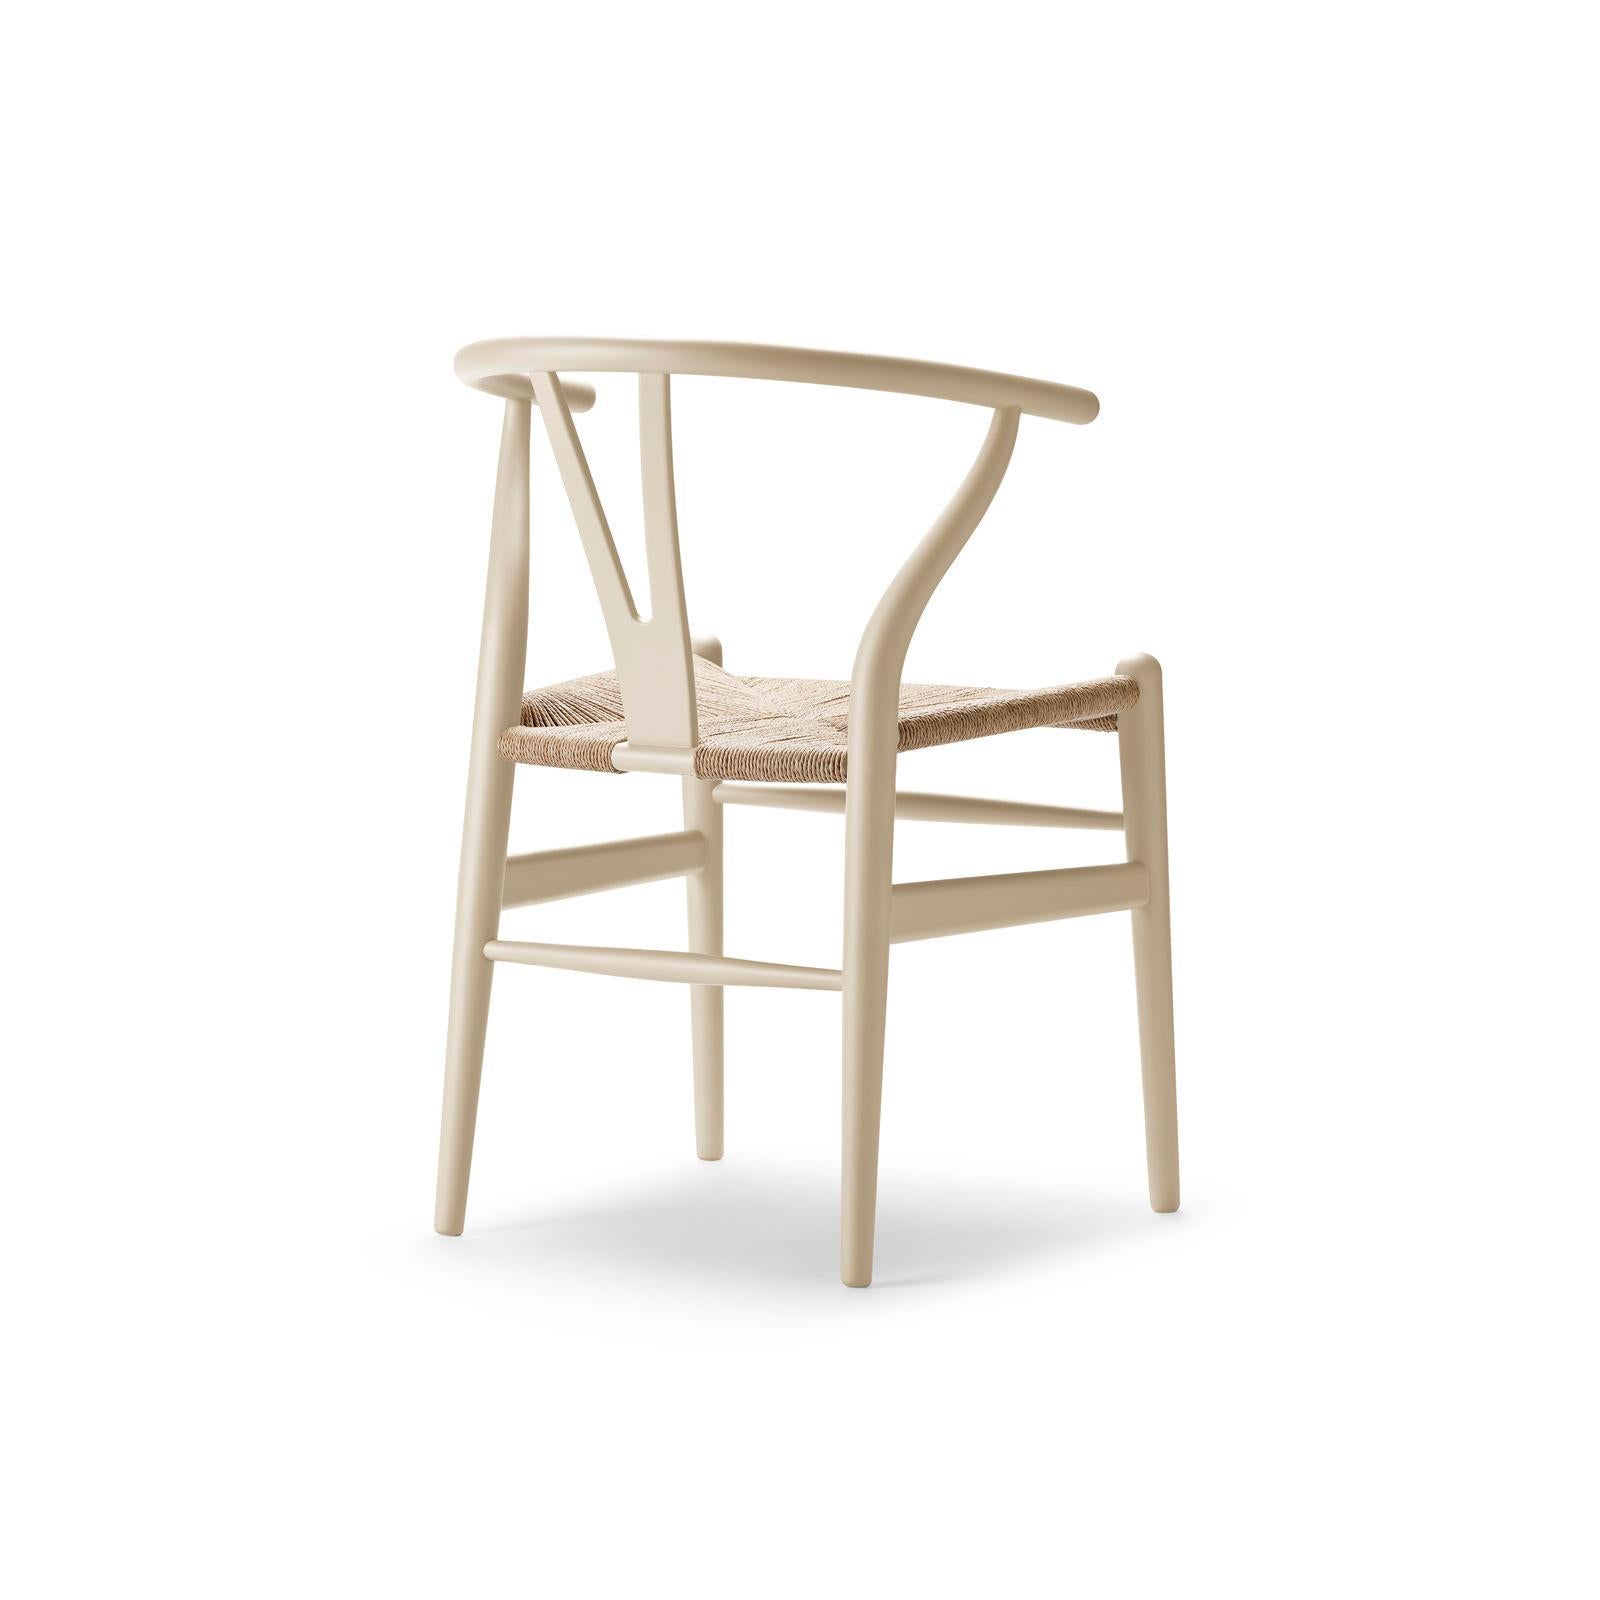 The Wishbone chair is now available in nine new colors by Ilse Crawford. To celebrate Hans J. Wegner’s more than 70 years of collaboration with Carl Hansen & Son, the company is 
now expanding its collaboration with London-based designer Ilse